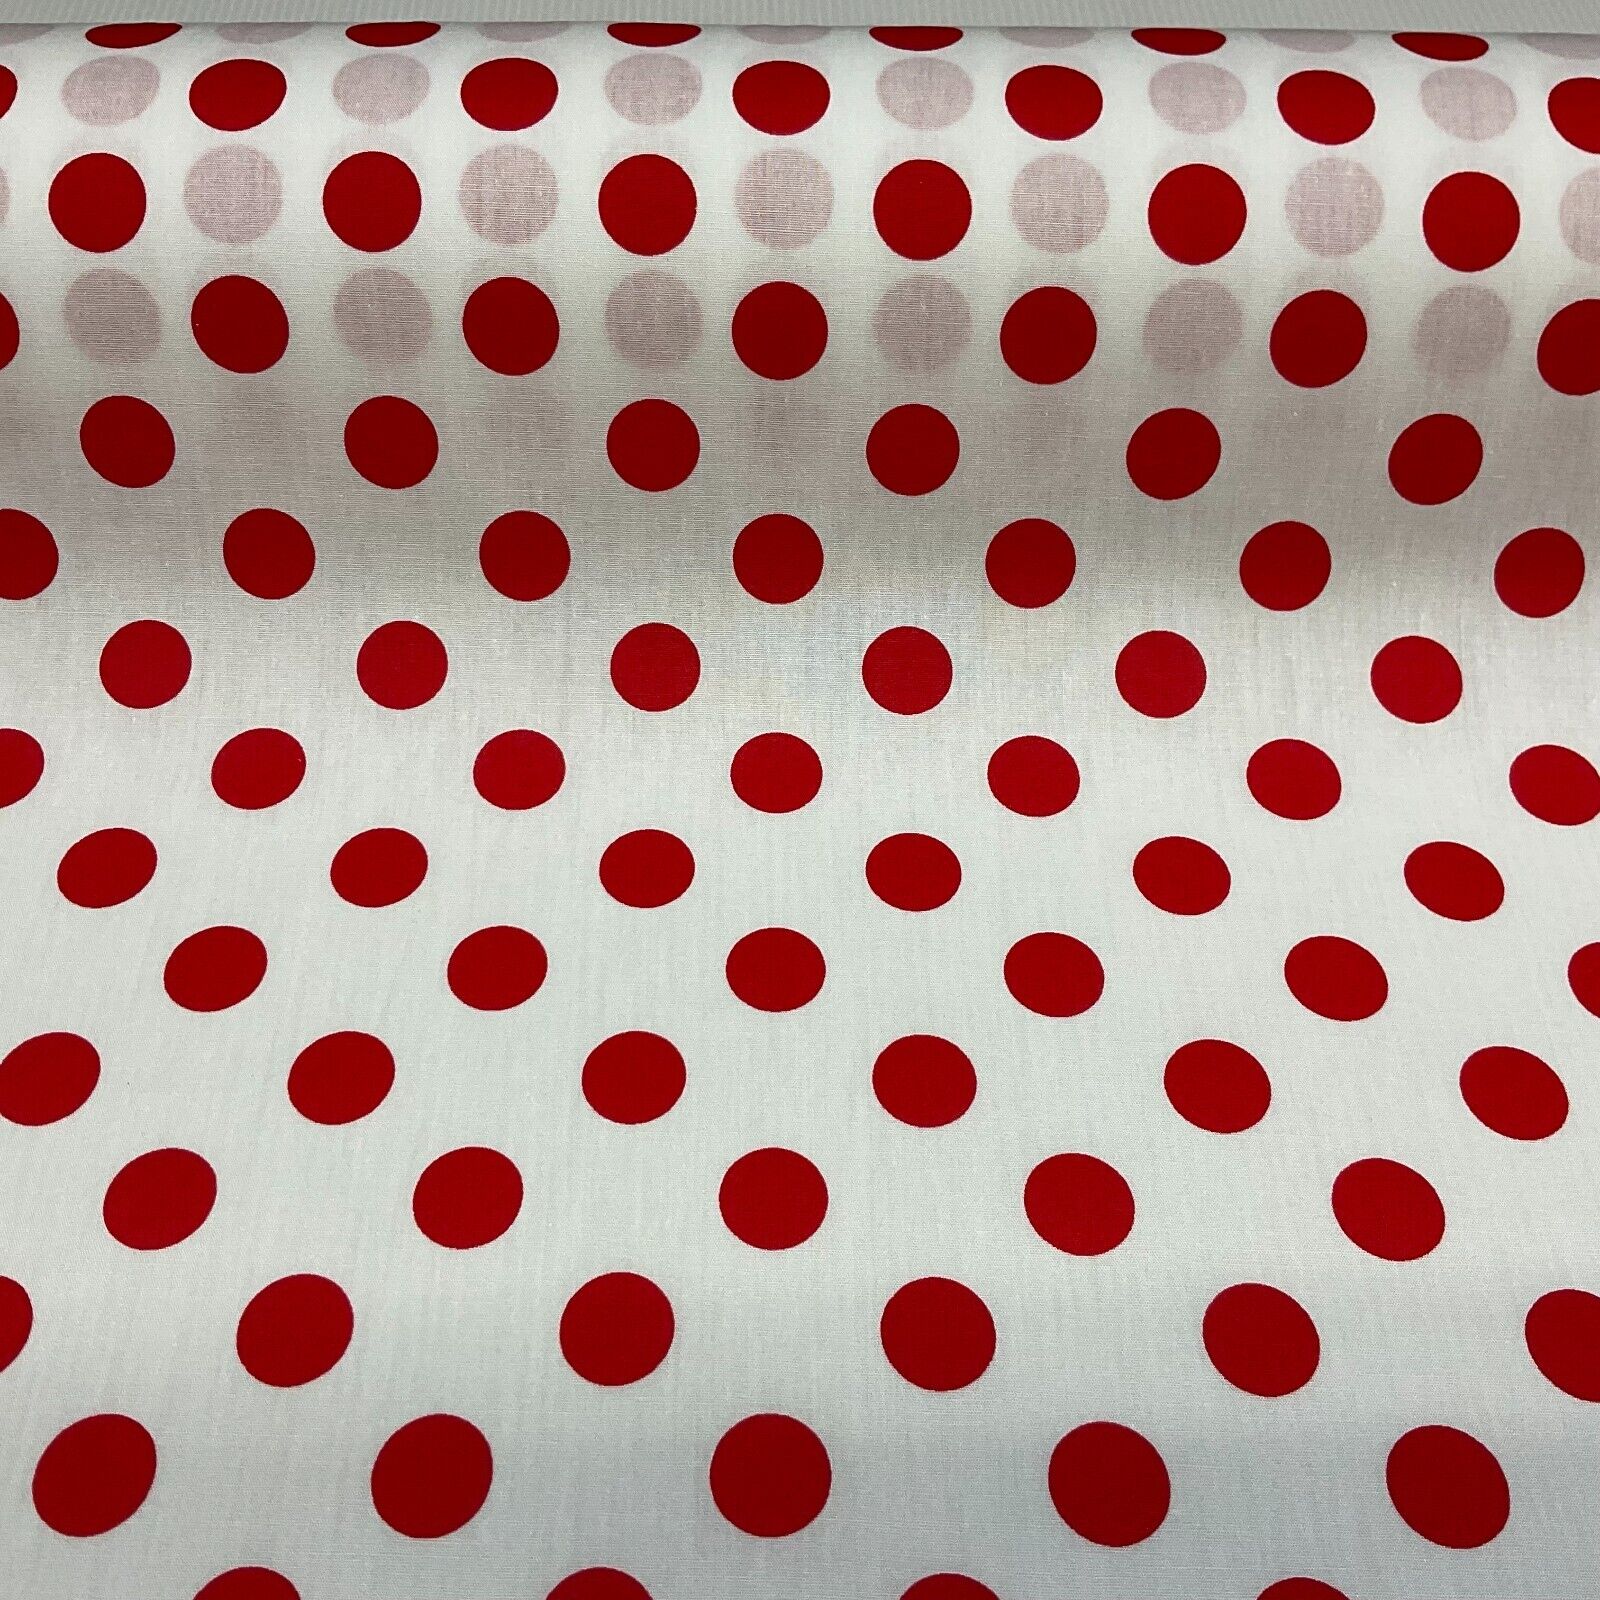 Soft Touch 100% Cotton Polka dot spot dotted printed dress fabric M1648